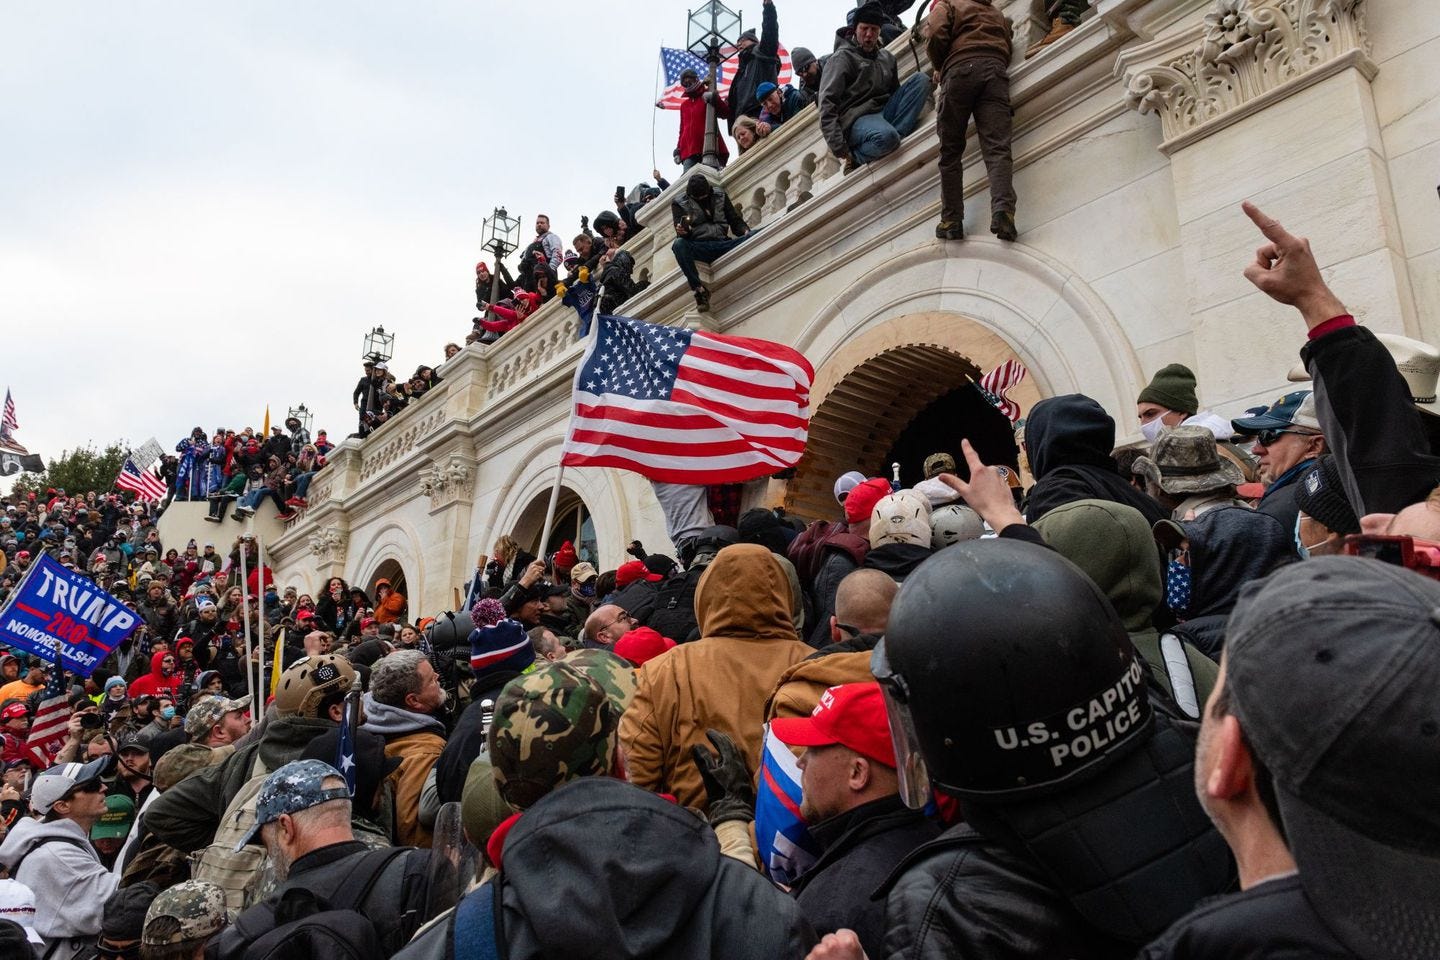 Demonstrators attempted to enter the US Capitol building during a protest in Washington, D.C., on Jan. 6, 2021.